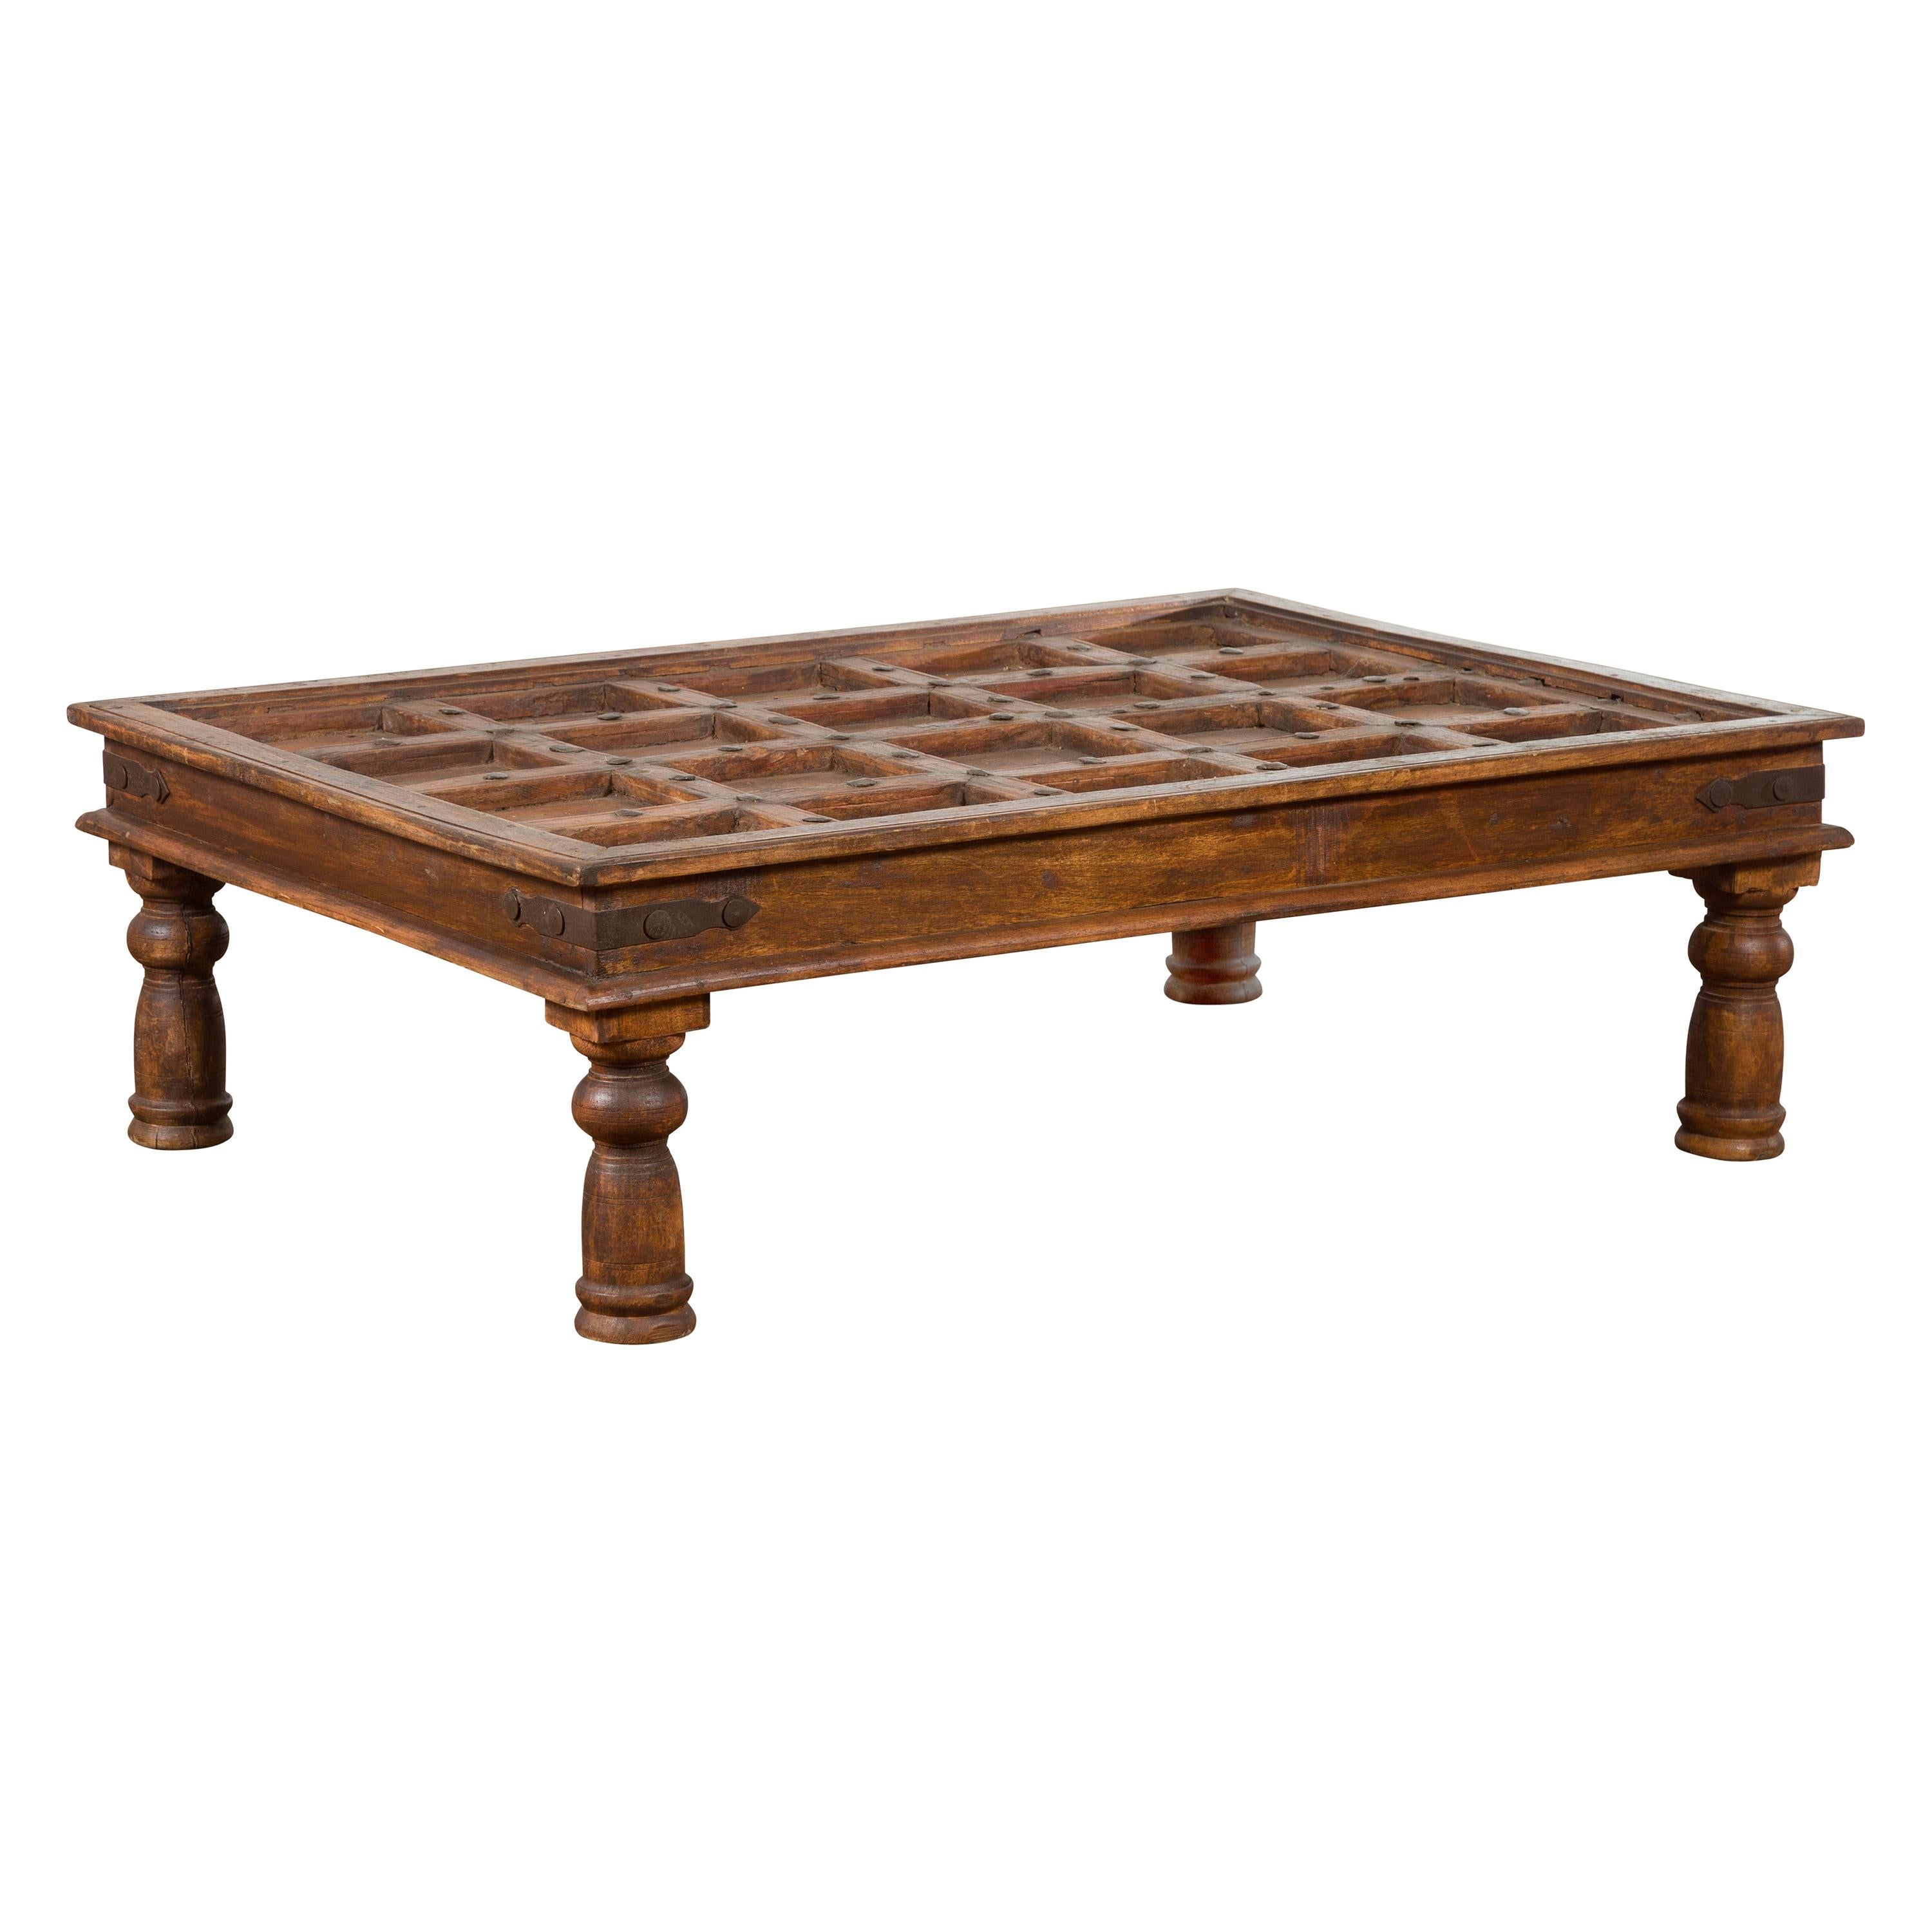 Indian 19th Century Paneled Door with Iron Accents Turned into a Coffee Table